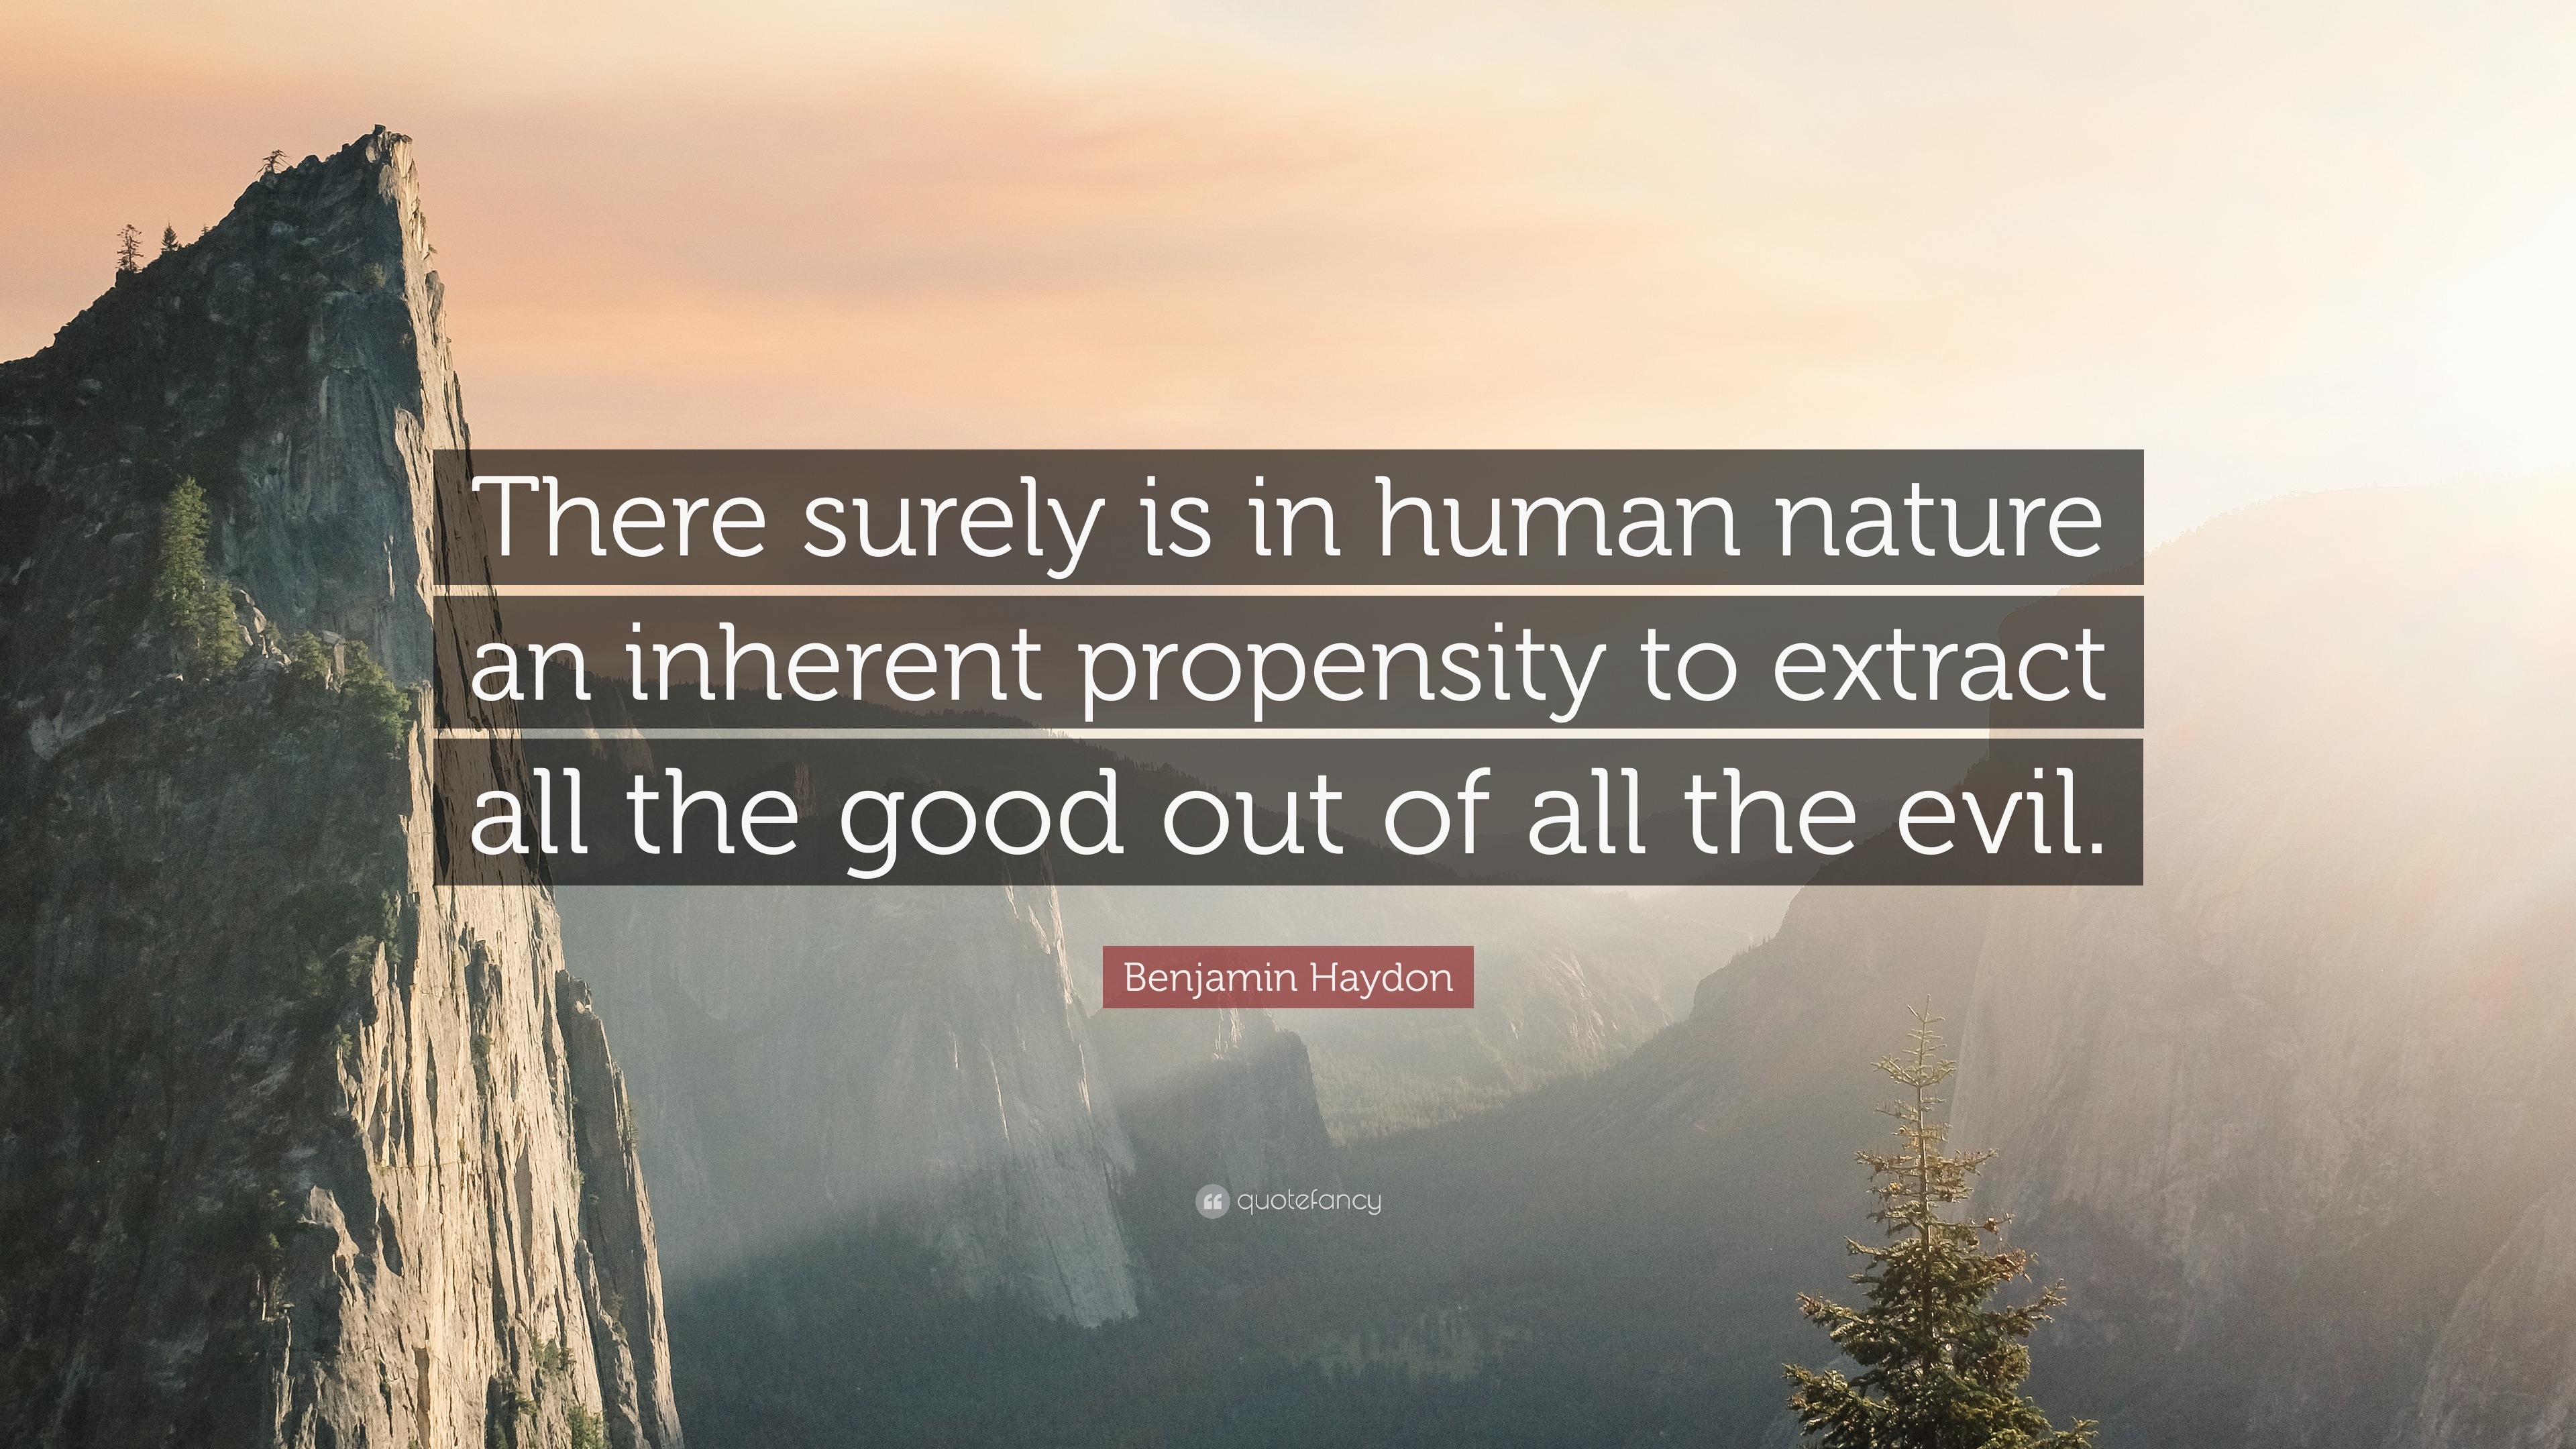 Benjamin Haydon Quote: “There in human nature an inherent propensity to extract all the